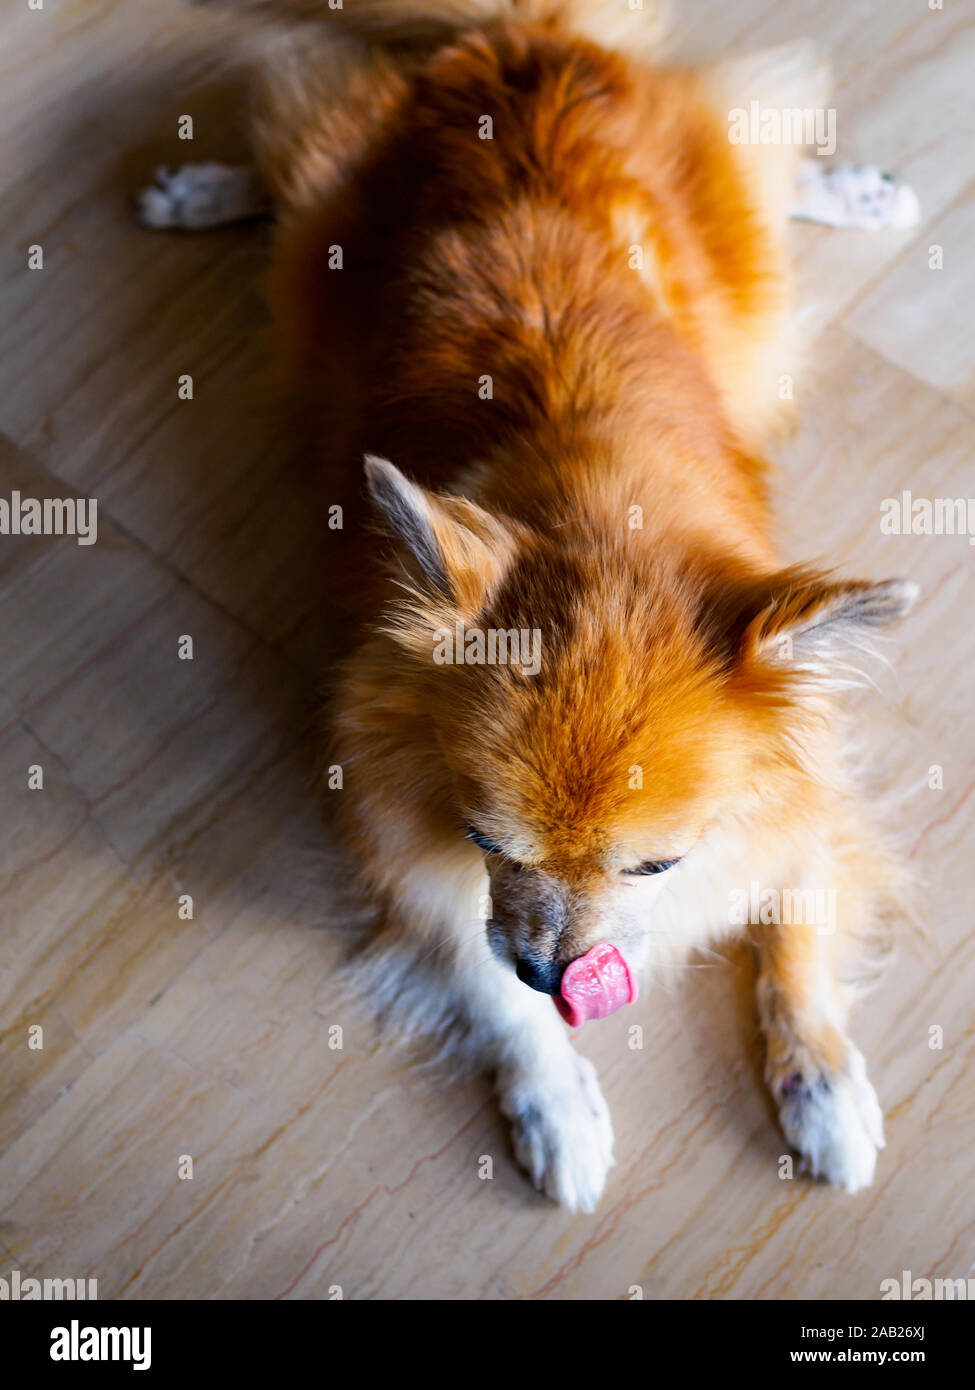 Overhead view of reddish-brown mixed breed pet dog of Pomeranian and Chihuahua stock lying flat on belly and licking his nose. Stock Photo